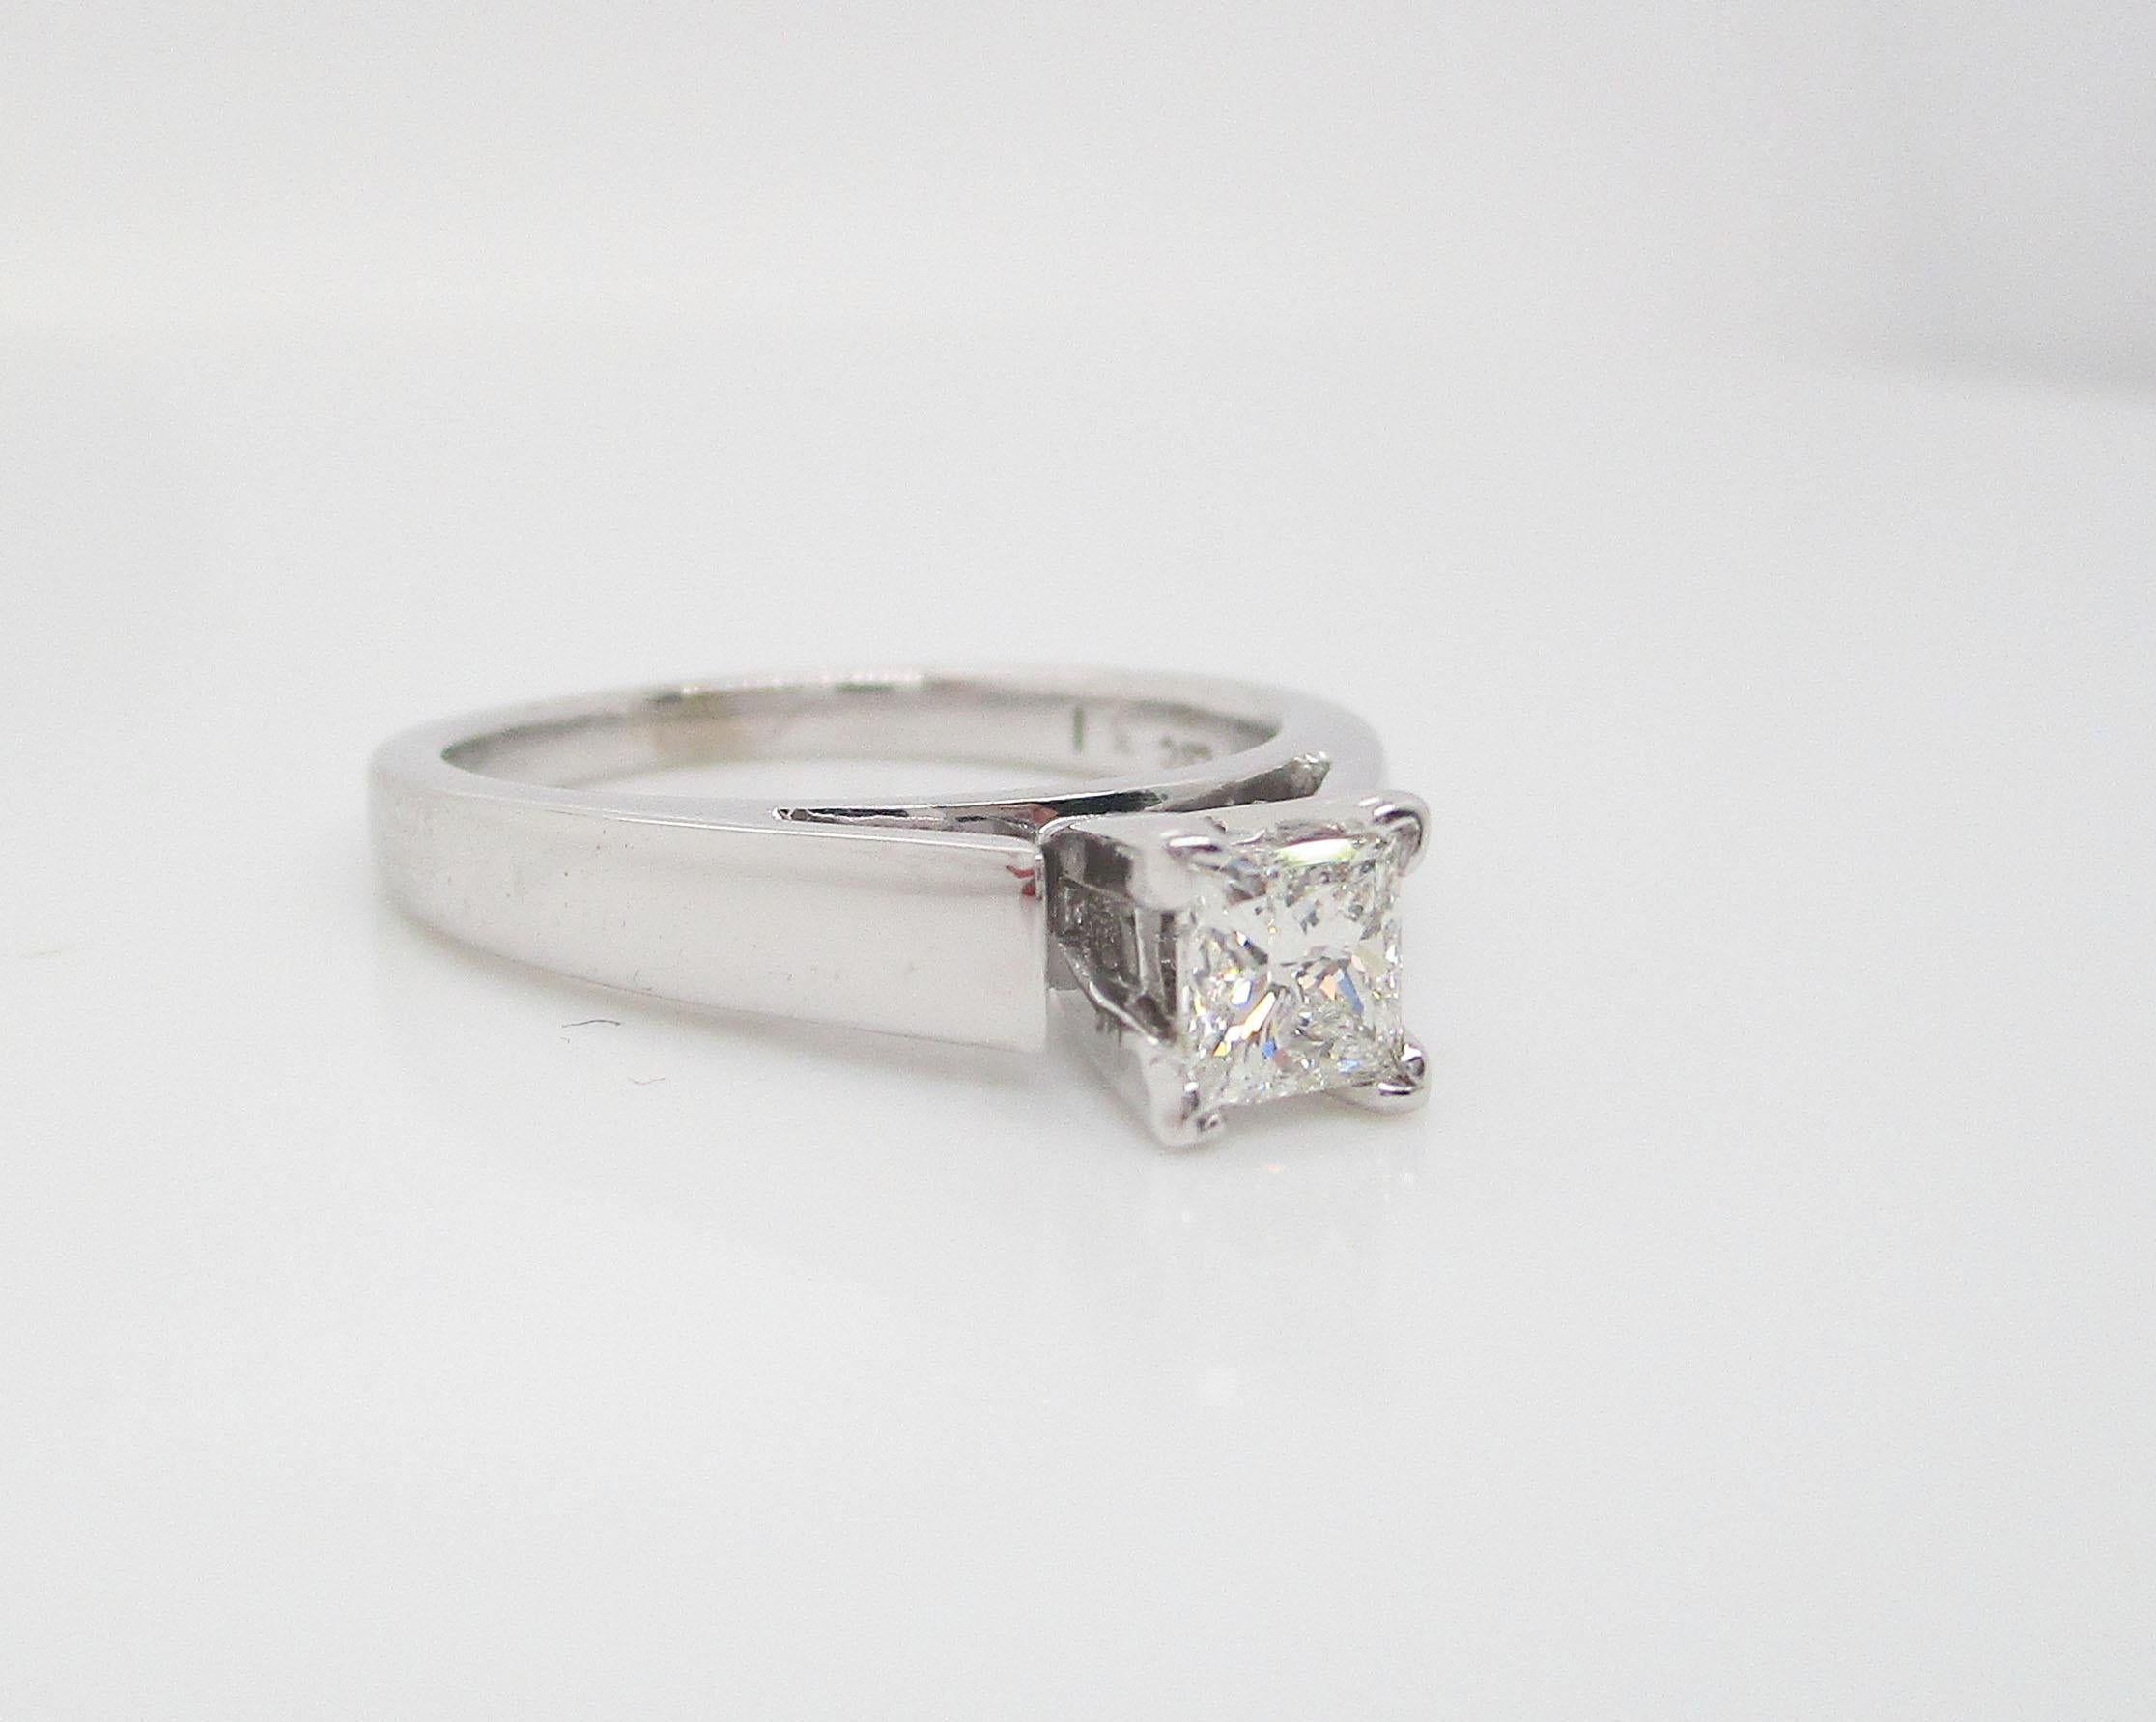 14 Karat White Gold Princess Cut Diamond Solitaire Engagement Ring In Excellent Condition For Sale In Lexington, KY